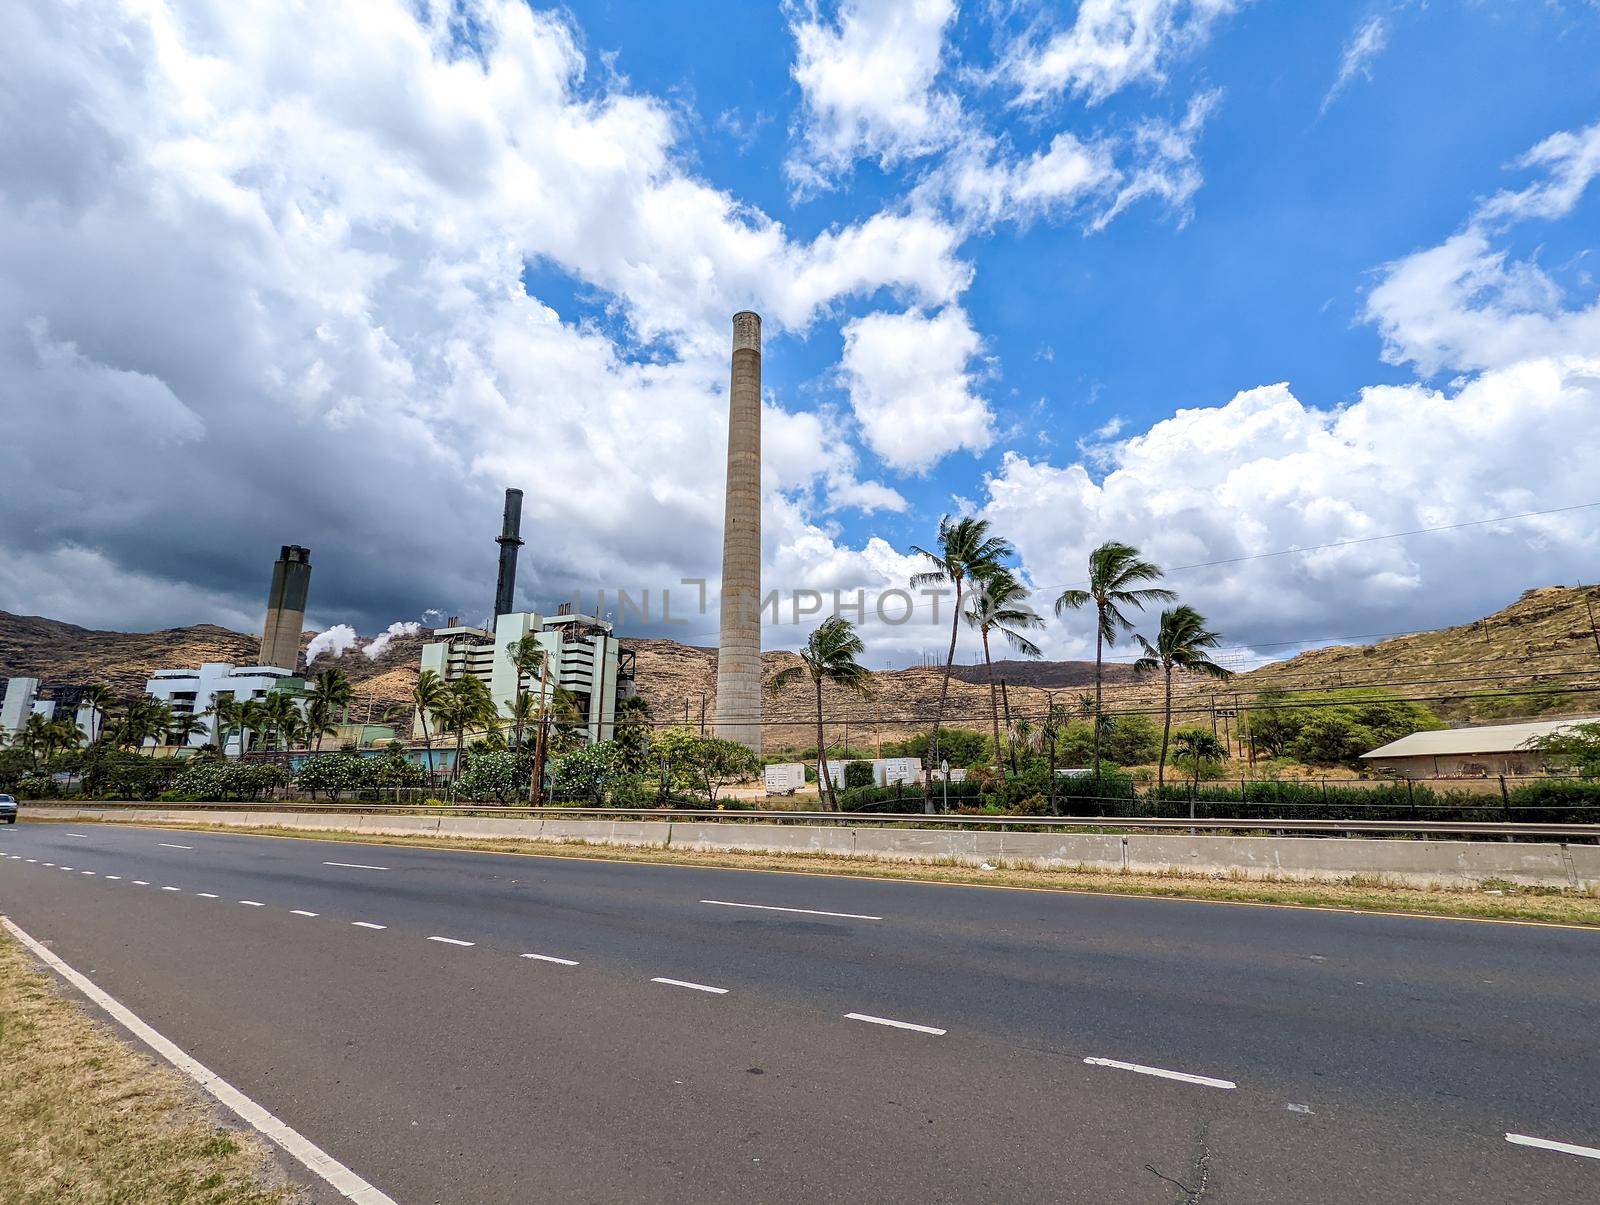 electric power steam plant in oahu hawaii by digidreamgrafix